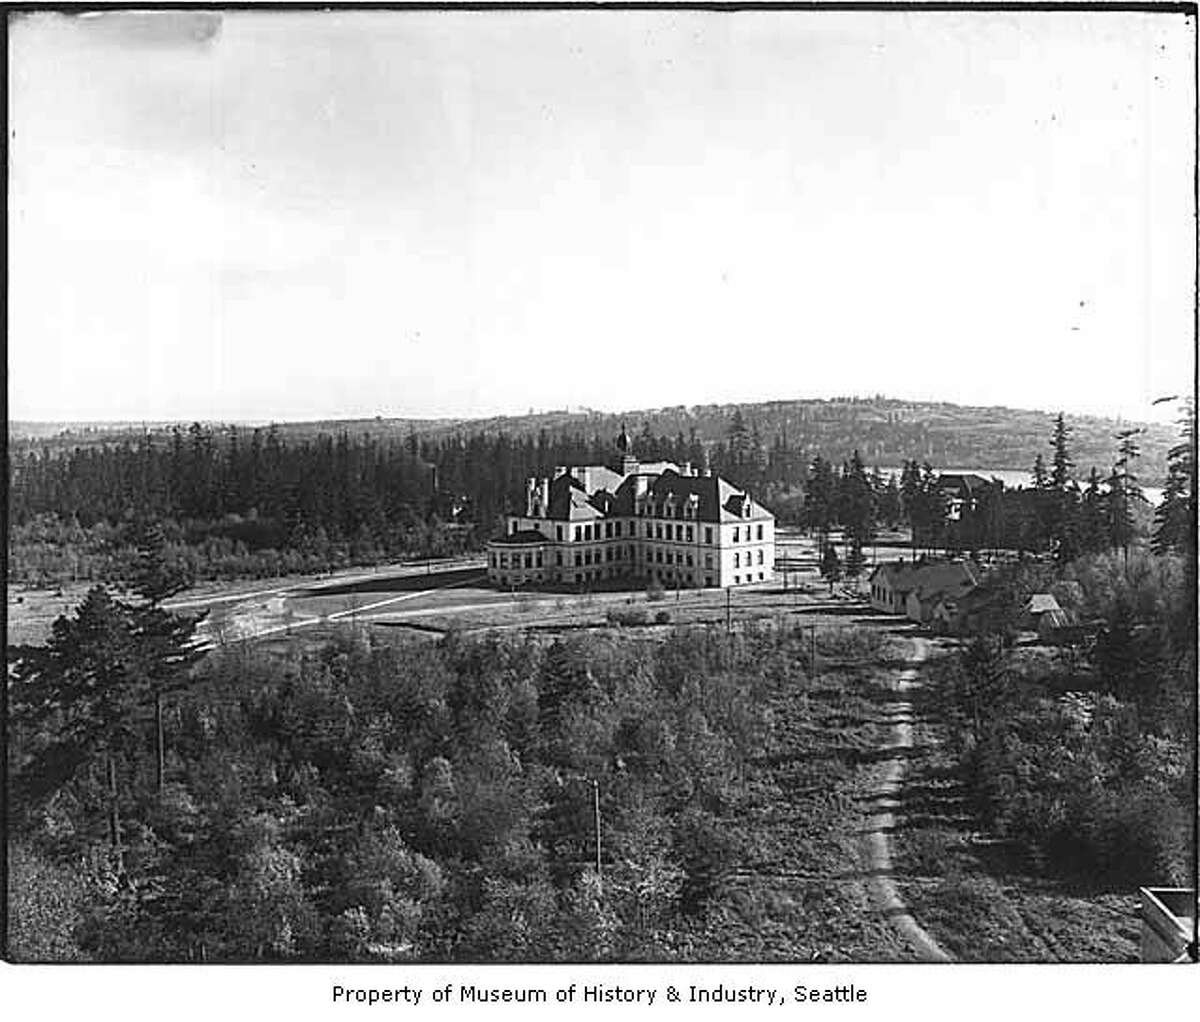 Denny Hall was the all-in-one building at UW's campus when it was built in 1895. Shown here in 1905, the building housed science labs, a library, a natural history museum, offices, 10 classrooms, a music room, a lecture hall and a 736-seat assembly hall. Photo courtesy MOHAI, PEMCO Webster and Stevens Collection, image number 1983.10.6985.1.